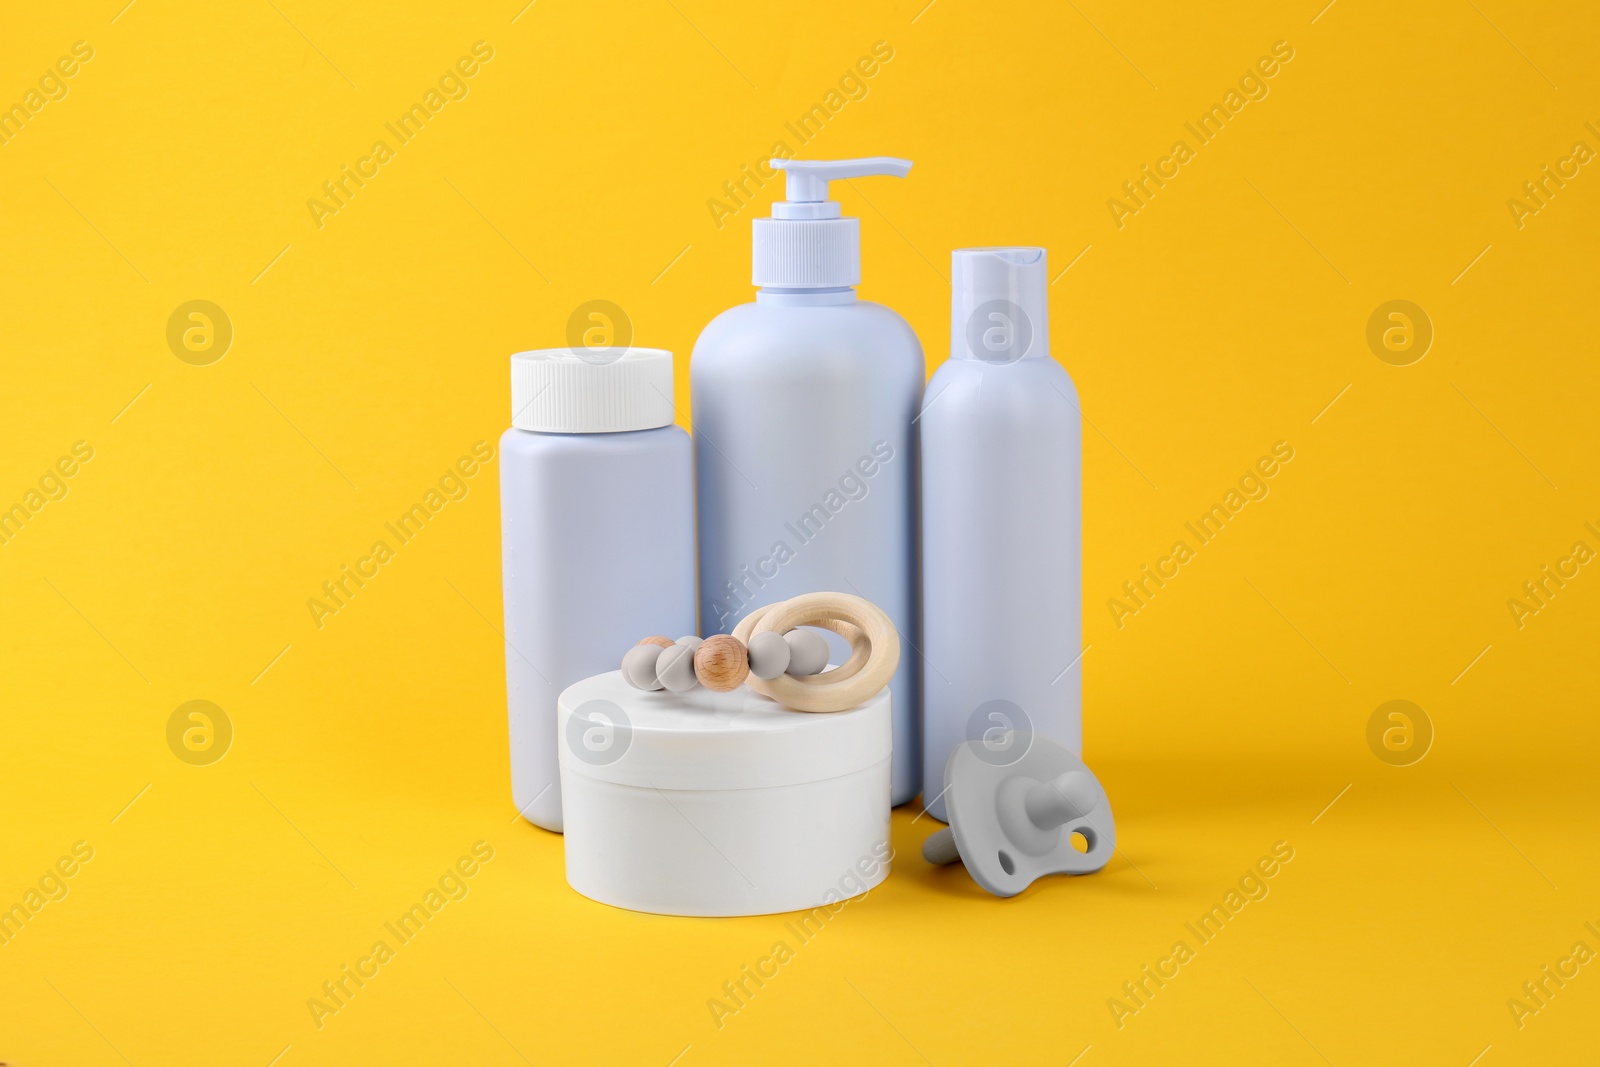 Photo of Different skin care products for baby and pacifier on yellow background